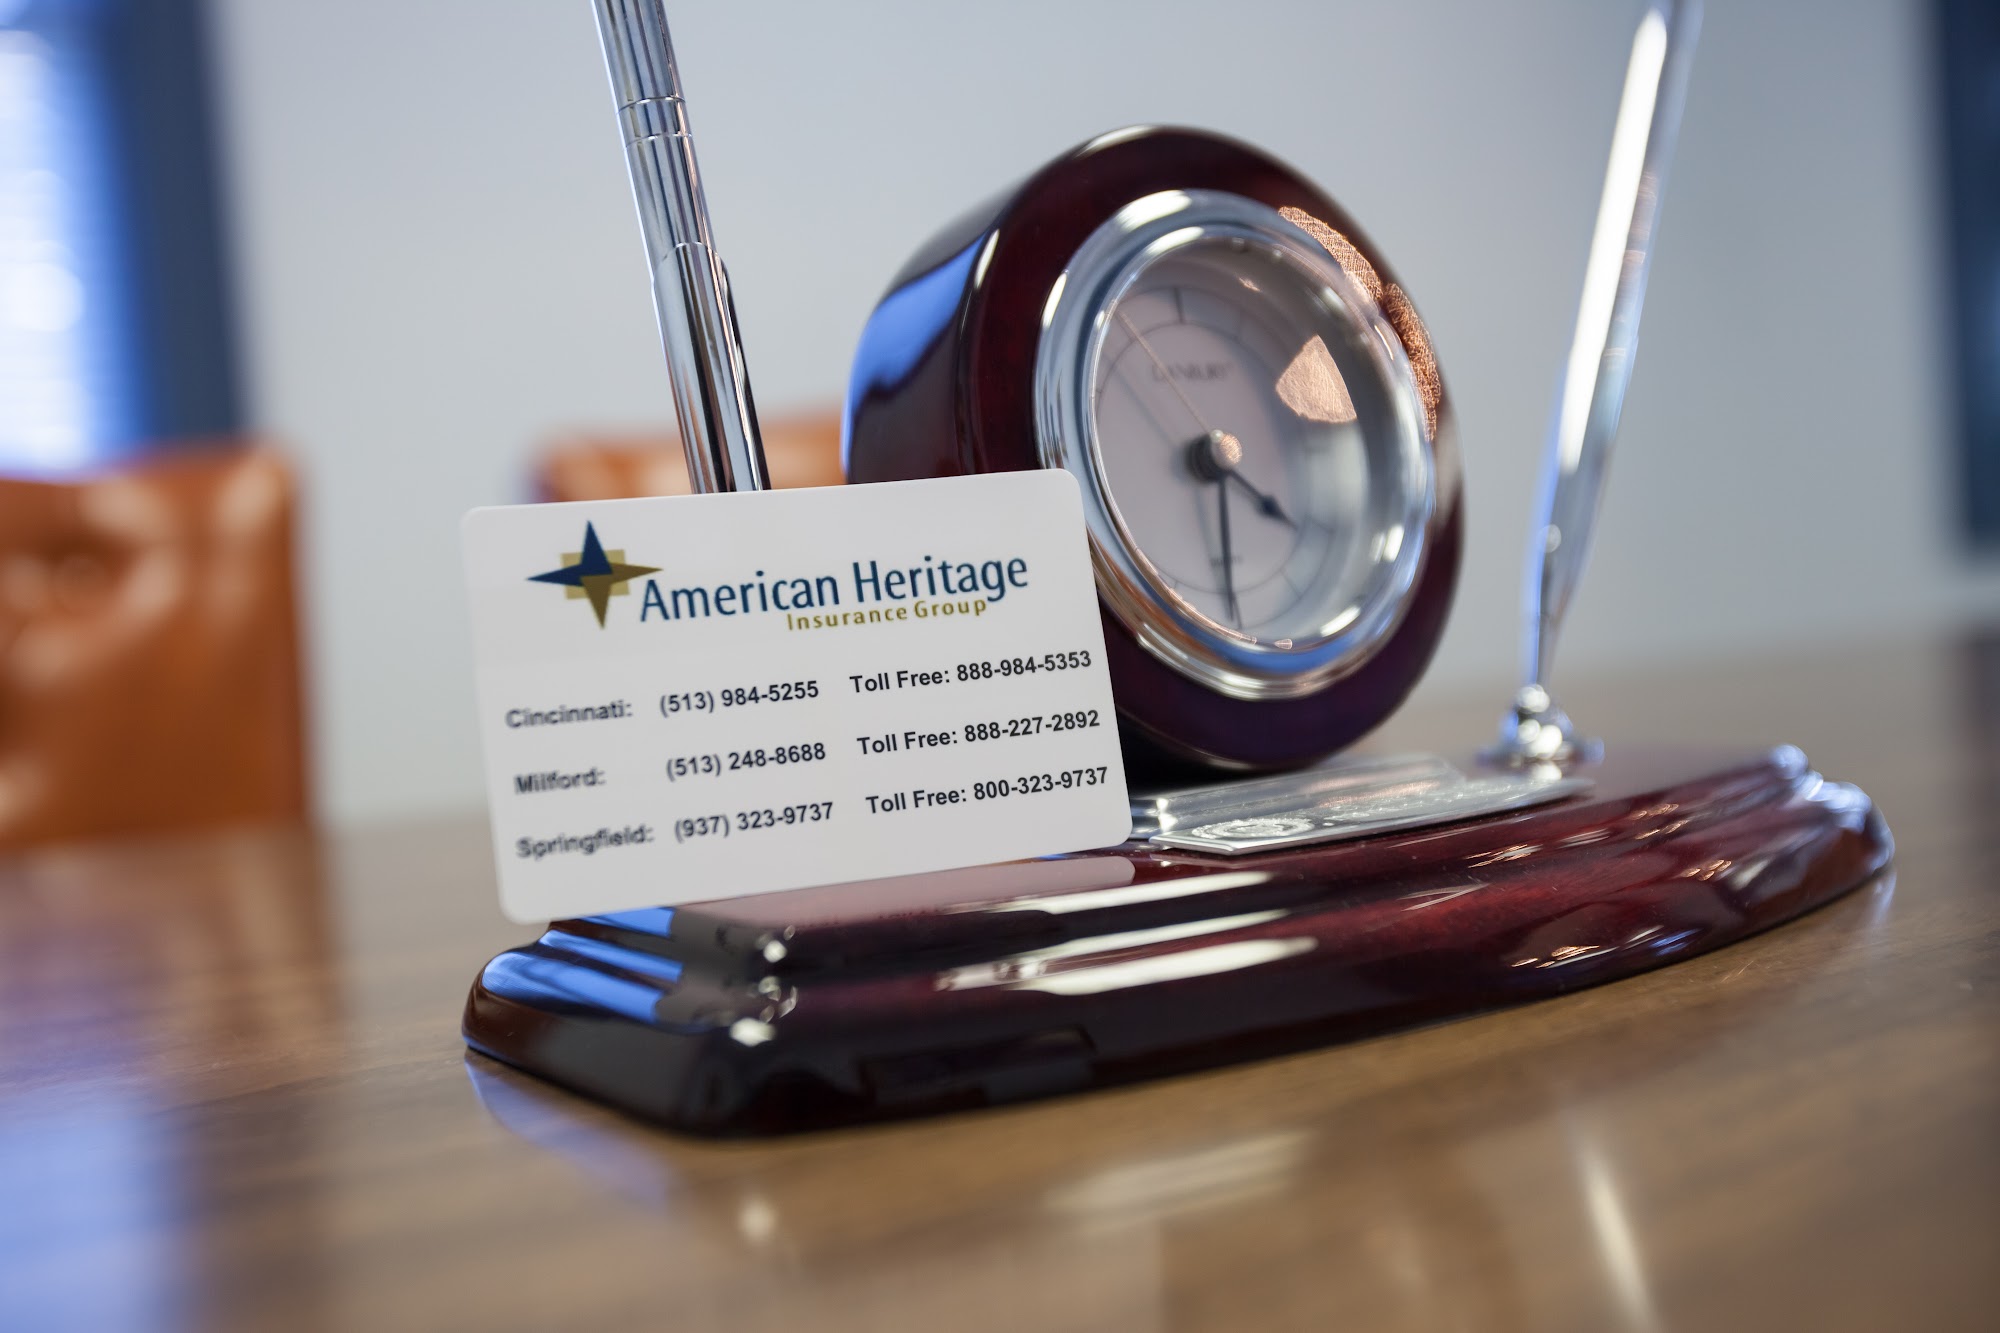 American Heritage Insurance Group